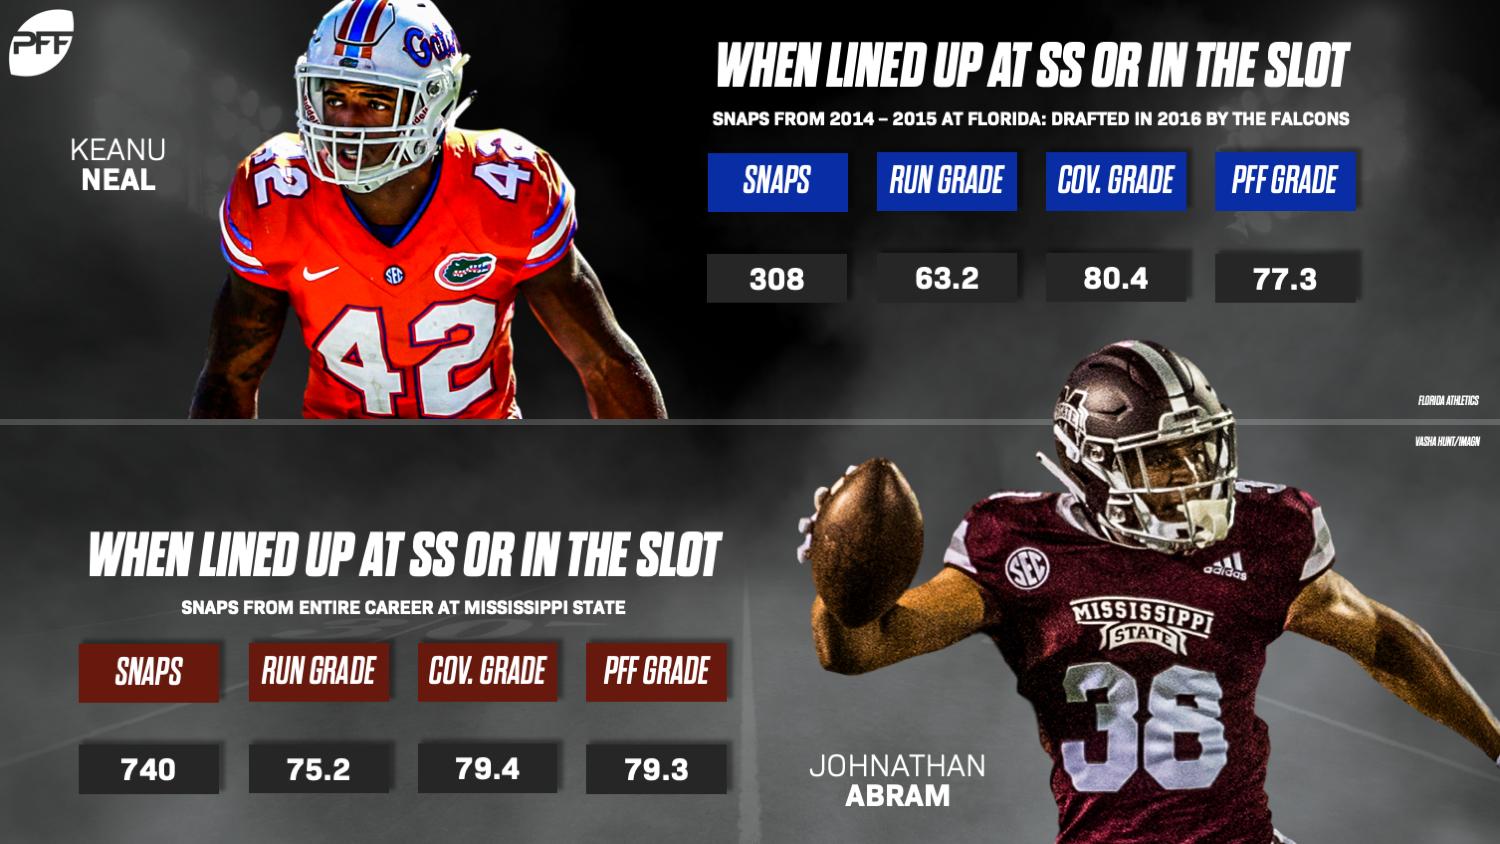 The PFF data suggests Johnathan Abram is best suited at strong safety in  the NFL, NFL Draft